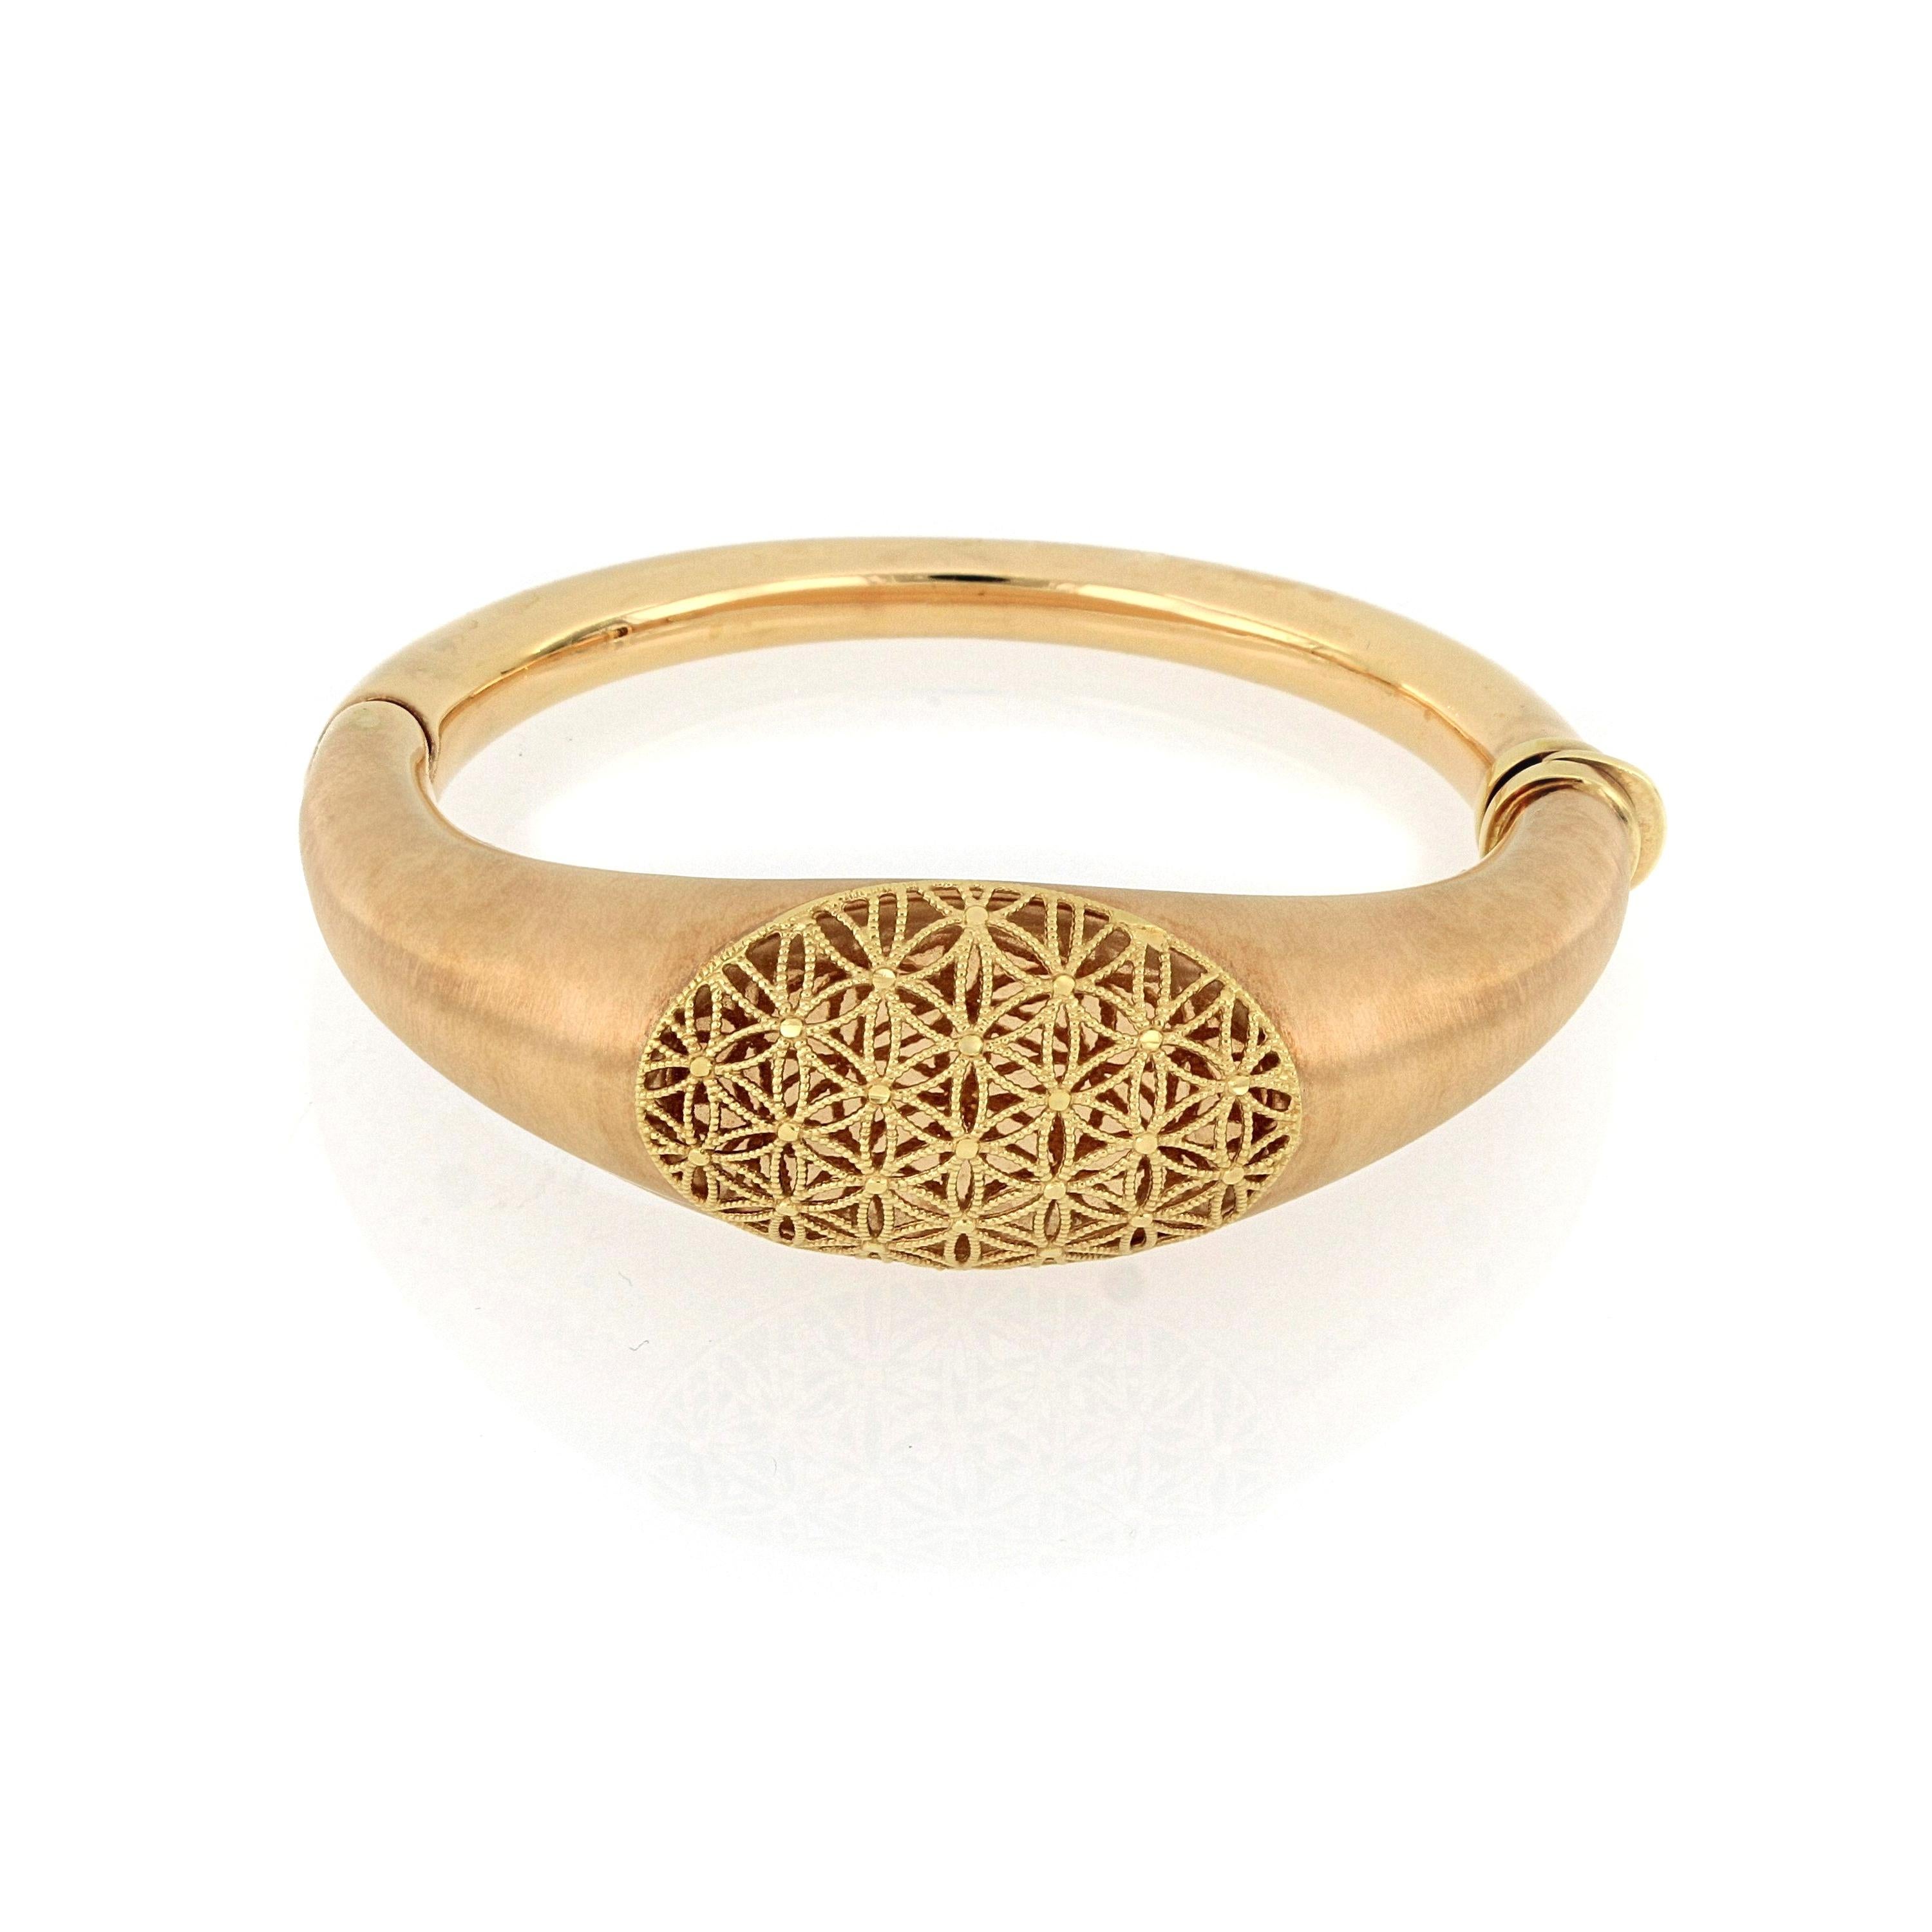 18 Karat Rose Gold Bangle, Italian made featuring geometric pattern and textured body with brushed finish. 
O’Che 1867 was founded one and a half centuries ago in Macau. The brand is renowned for its high jewellery collections with fabulous designs.